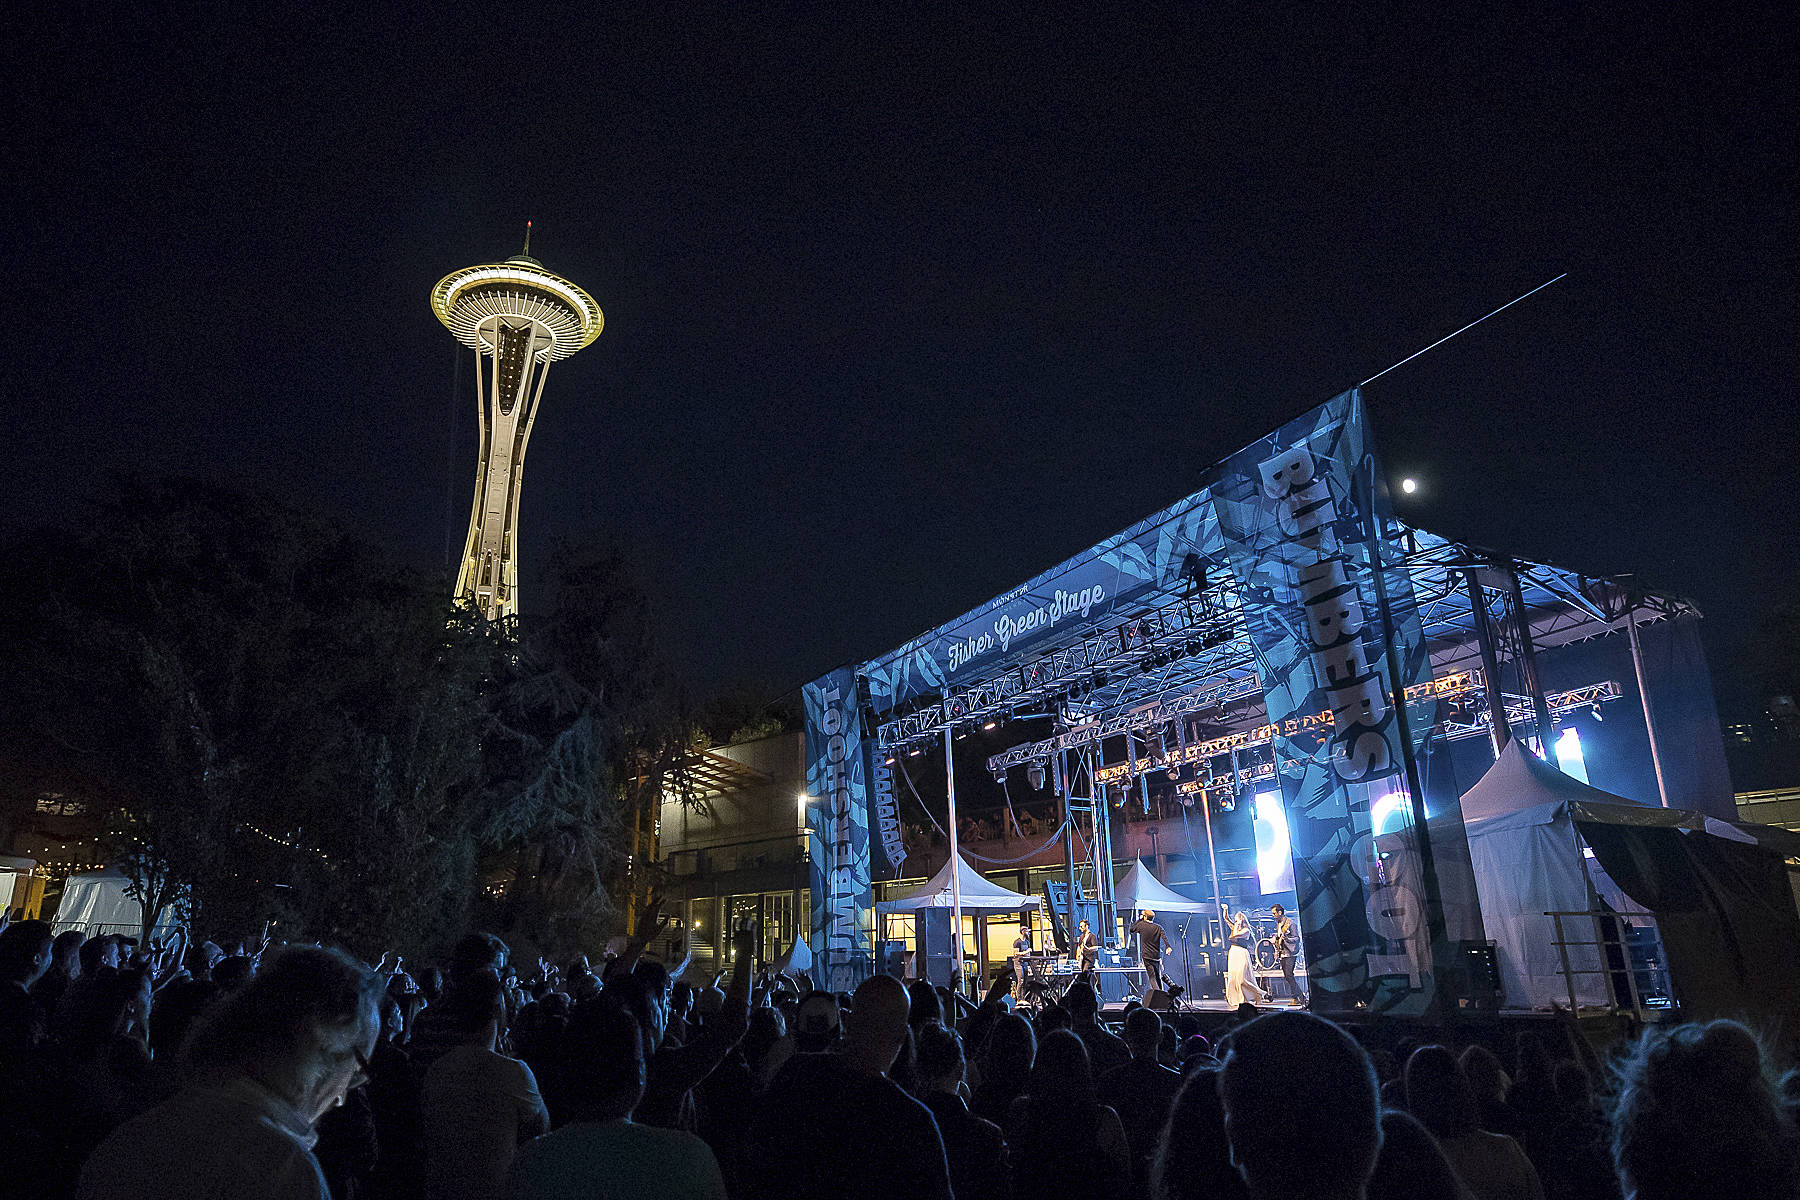 Seattle Center comes alive for Bumbershoot. Photo by David Conger/Bumbershoot